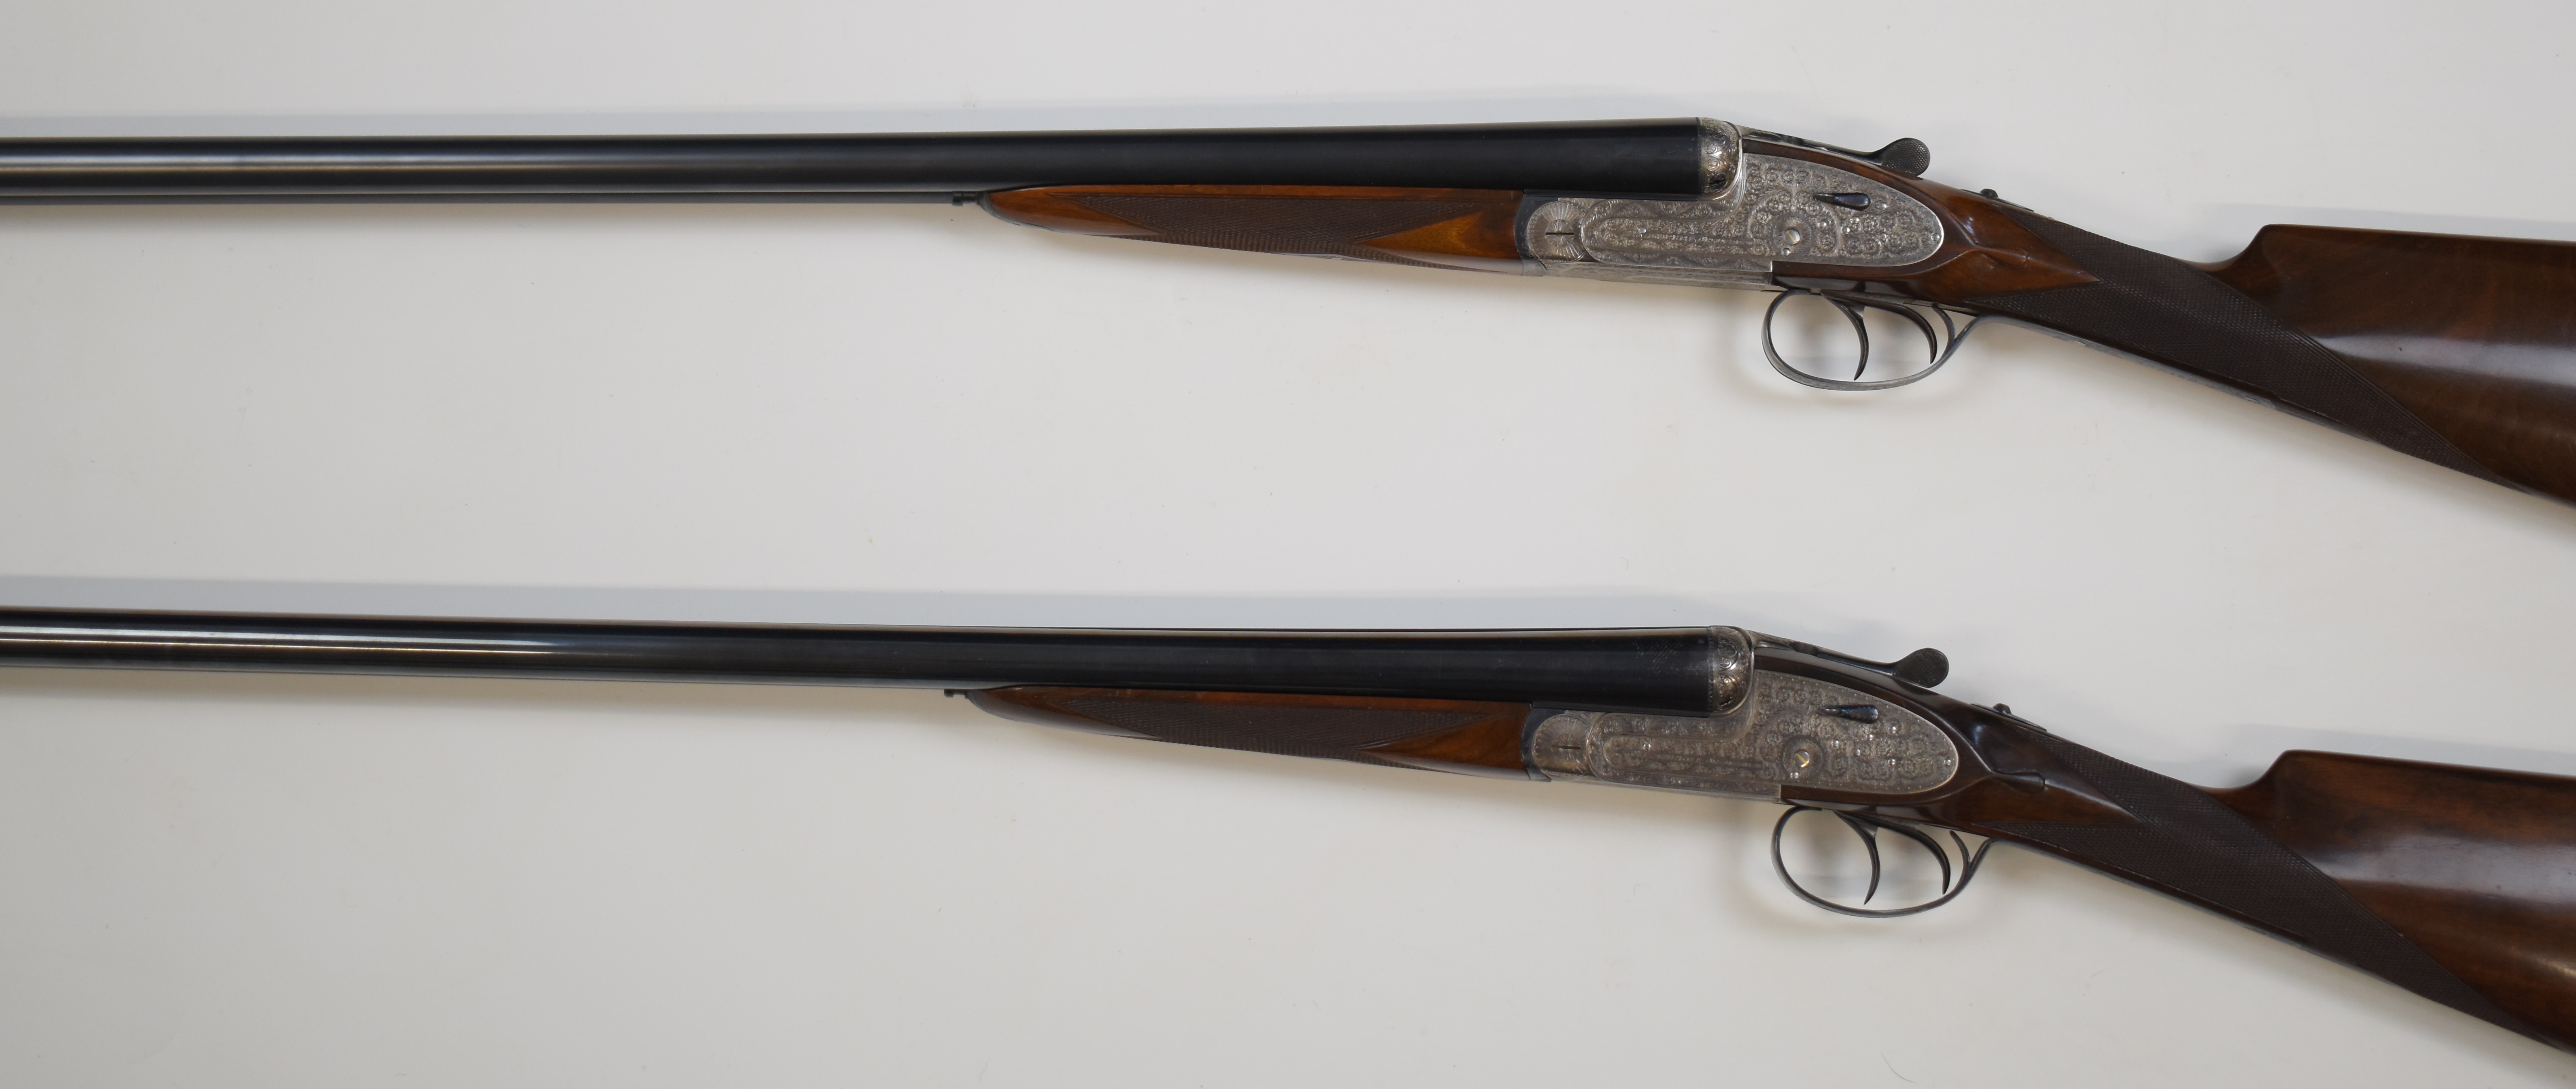 Pair of AYA No 2 12 bore sidelock side by side ejector shotguns each with hand detachable locks, all - Image 25 of 30